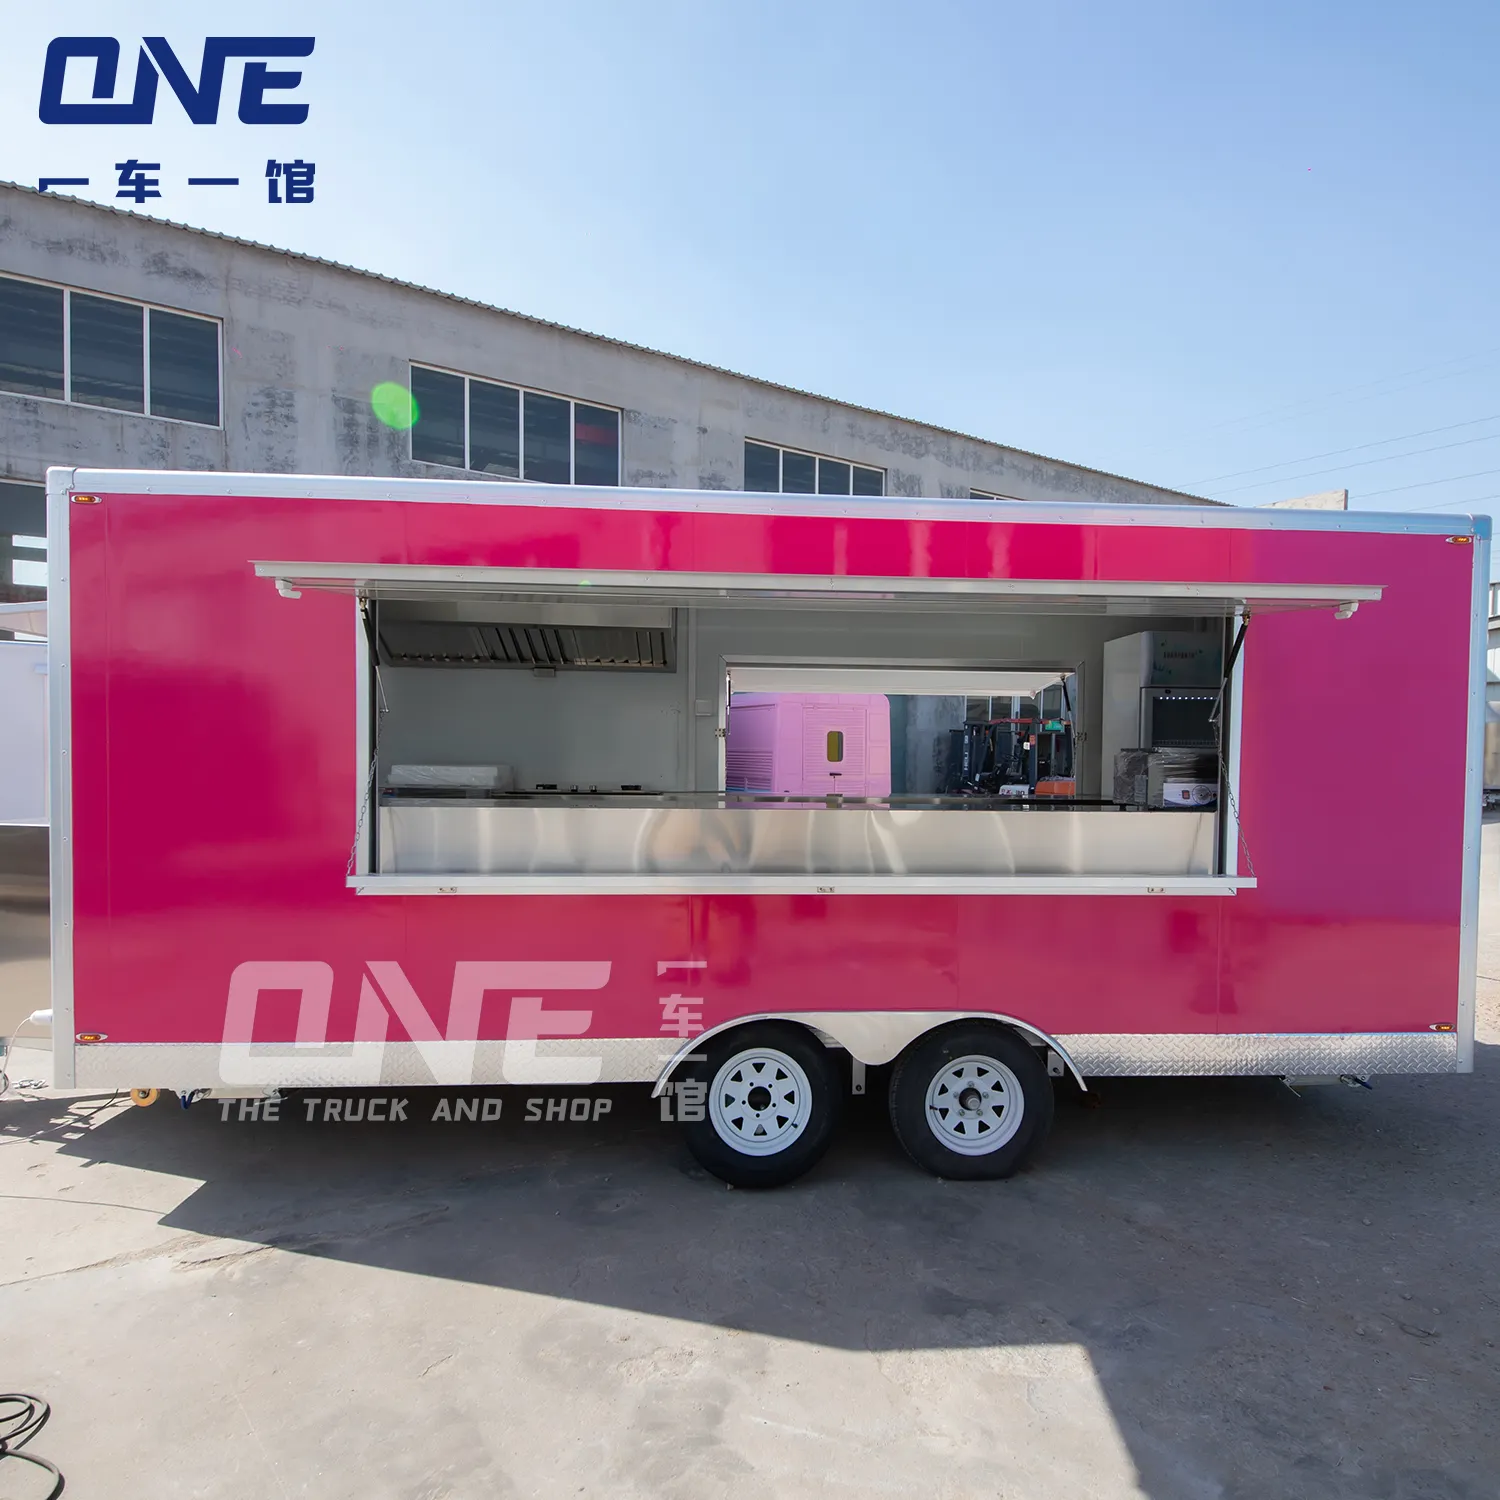 mobile salon food truck pink hot dog stand mobile kitchen ice cream kiosk hot dog cart with grill and deep fryer food trailer